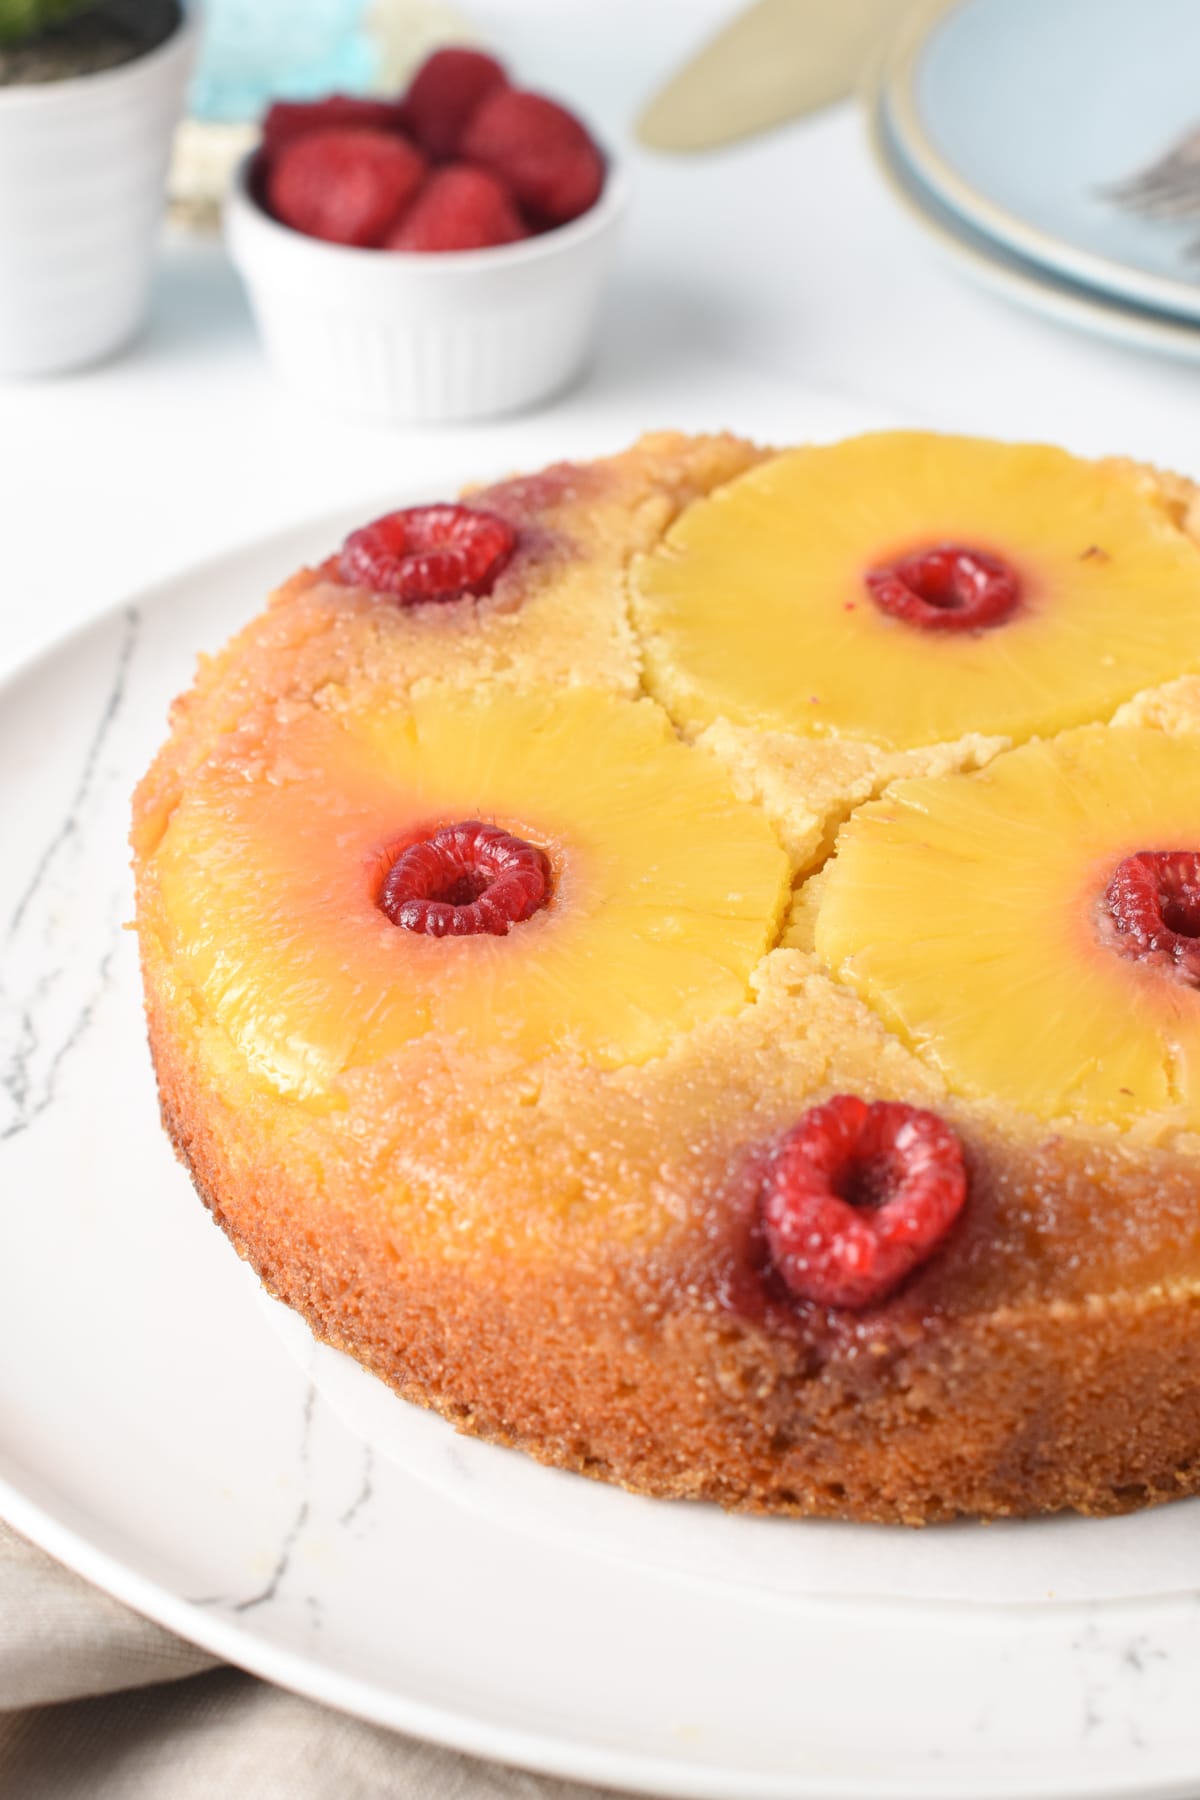 Keto Pineapple Up Side Down Cake With Almond Flour Gluten freeKeto Pineapple Up Side Down Cake With Almond Flour Gluten free